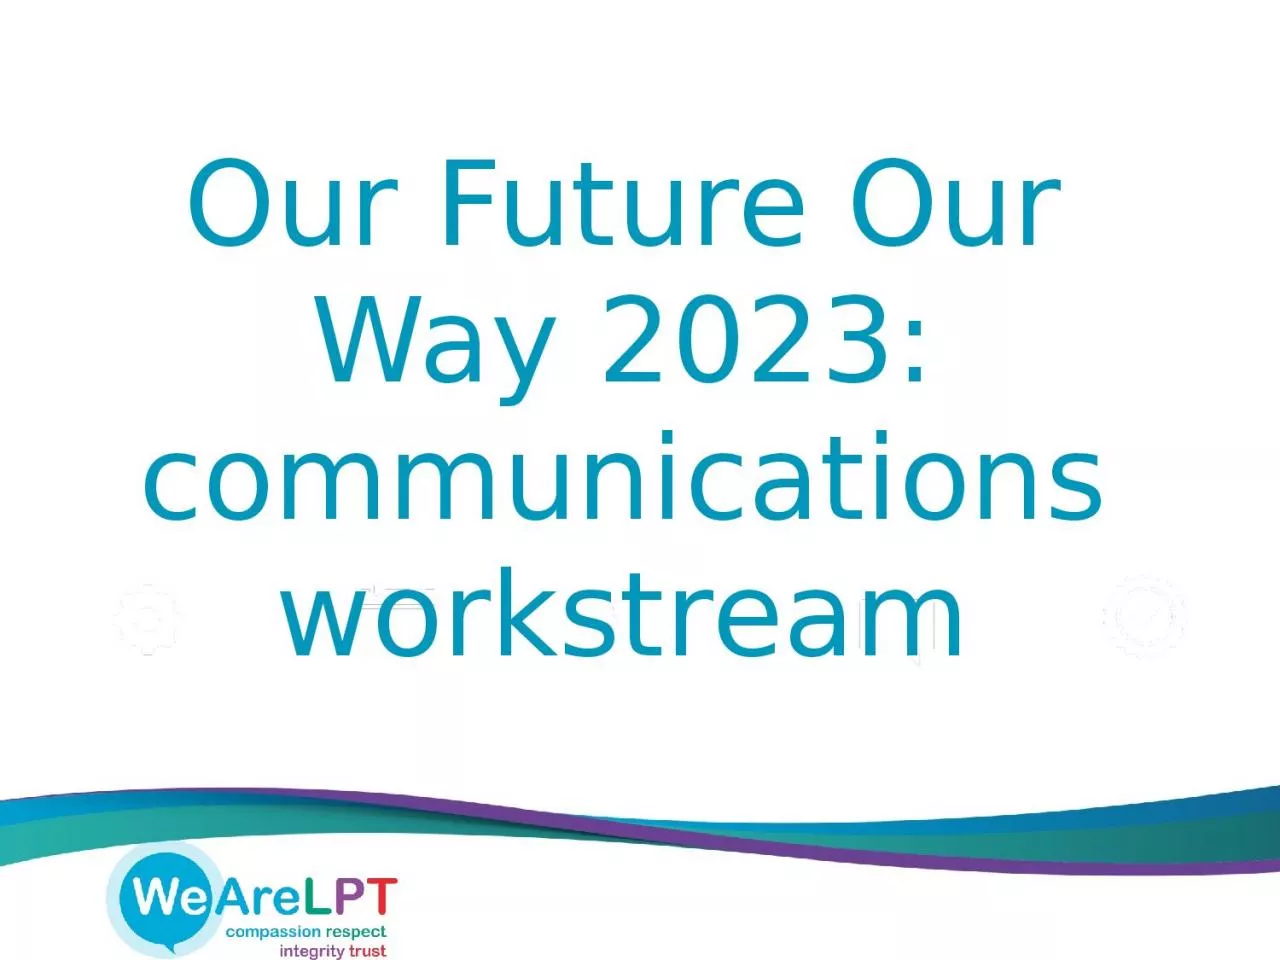 Our Future Our Way 2023: communications workstream